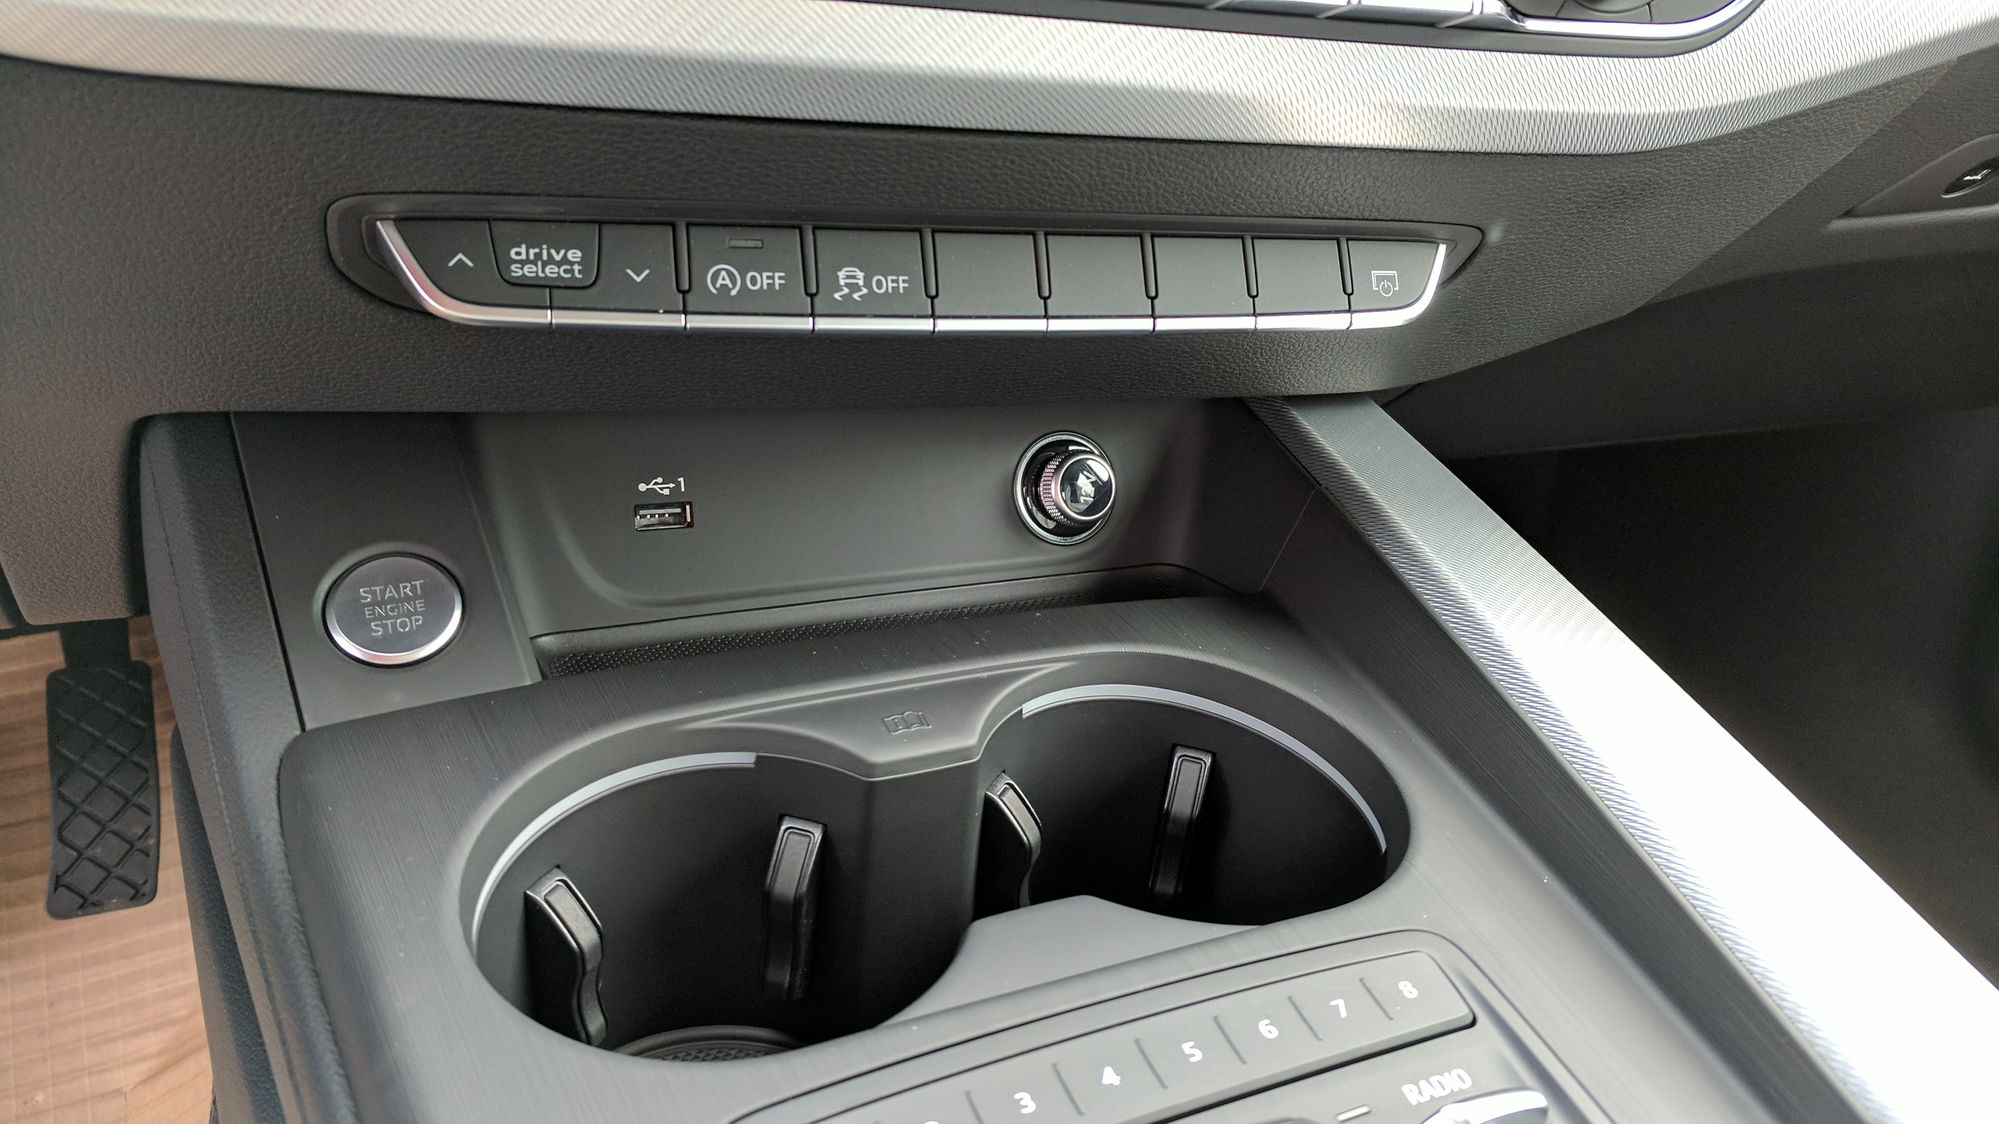 USB Port Relocated (mid-model year change) - AudiWorld Forums